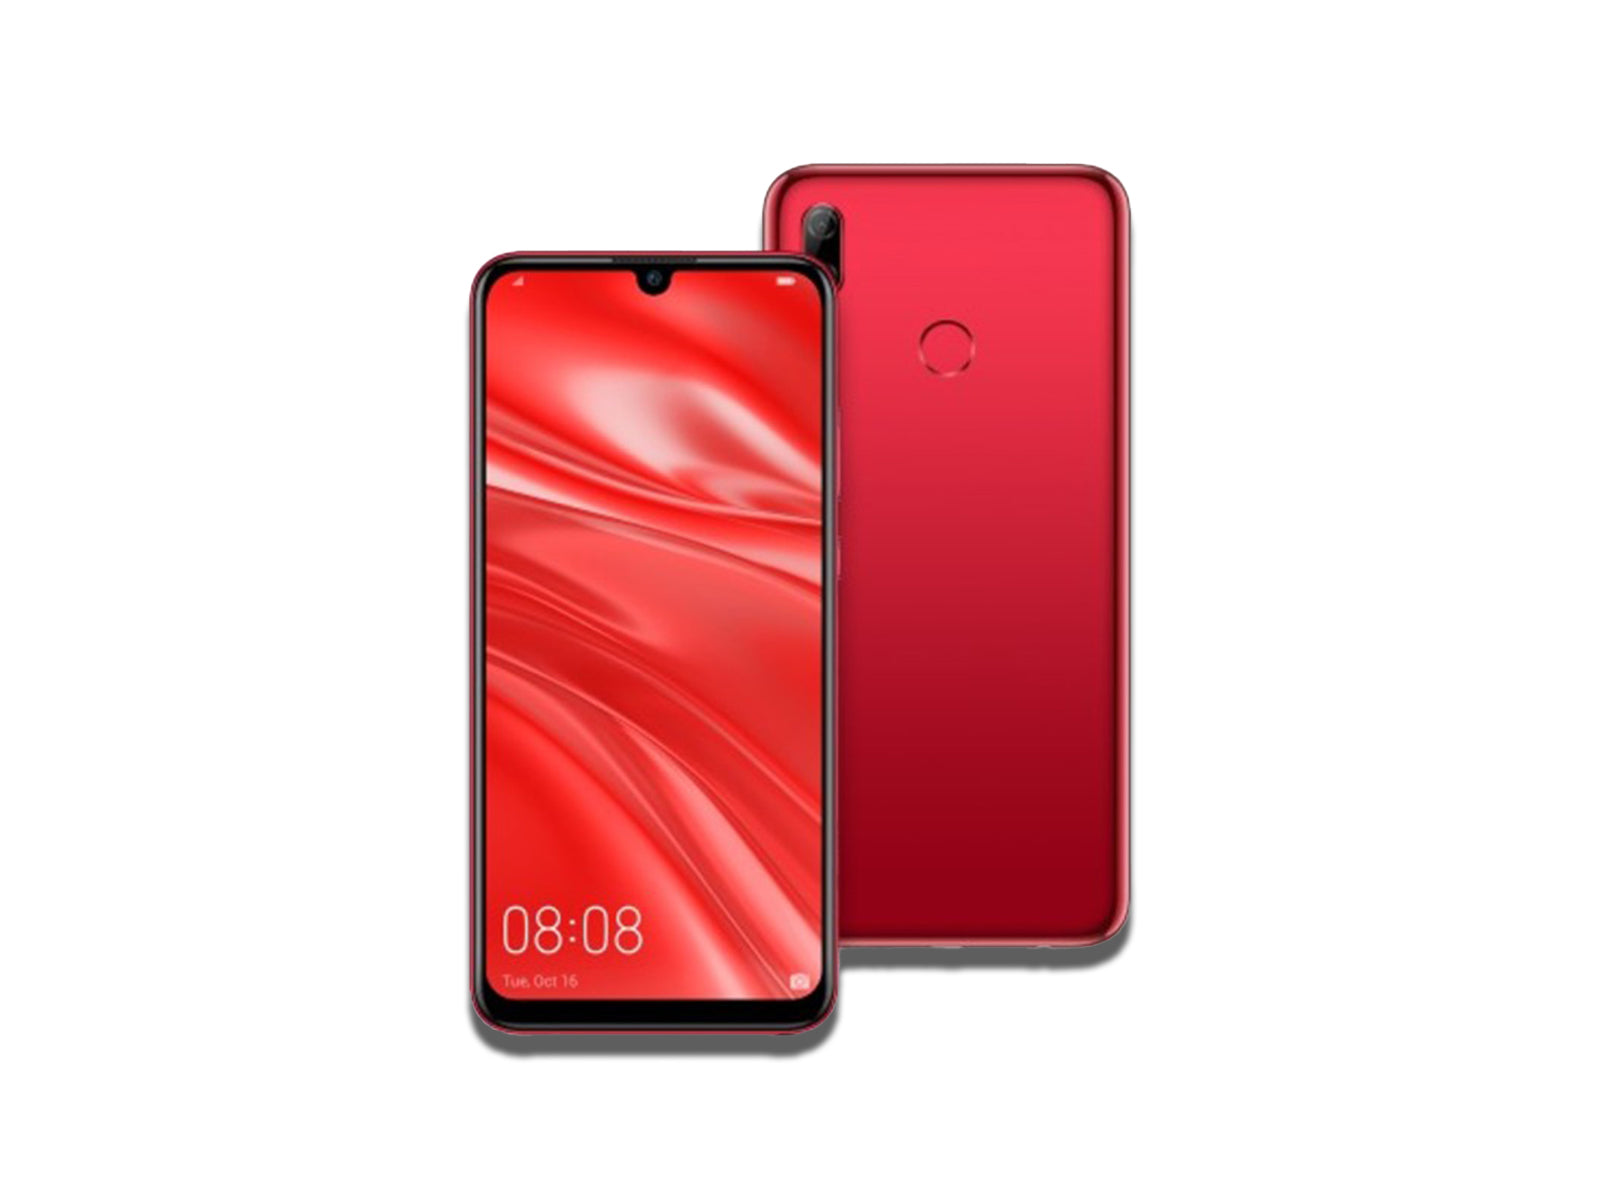 Back And Front View Image of The Red Huawei Nova Lite 3 Phone on The White Background